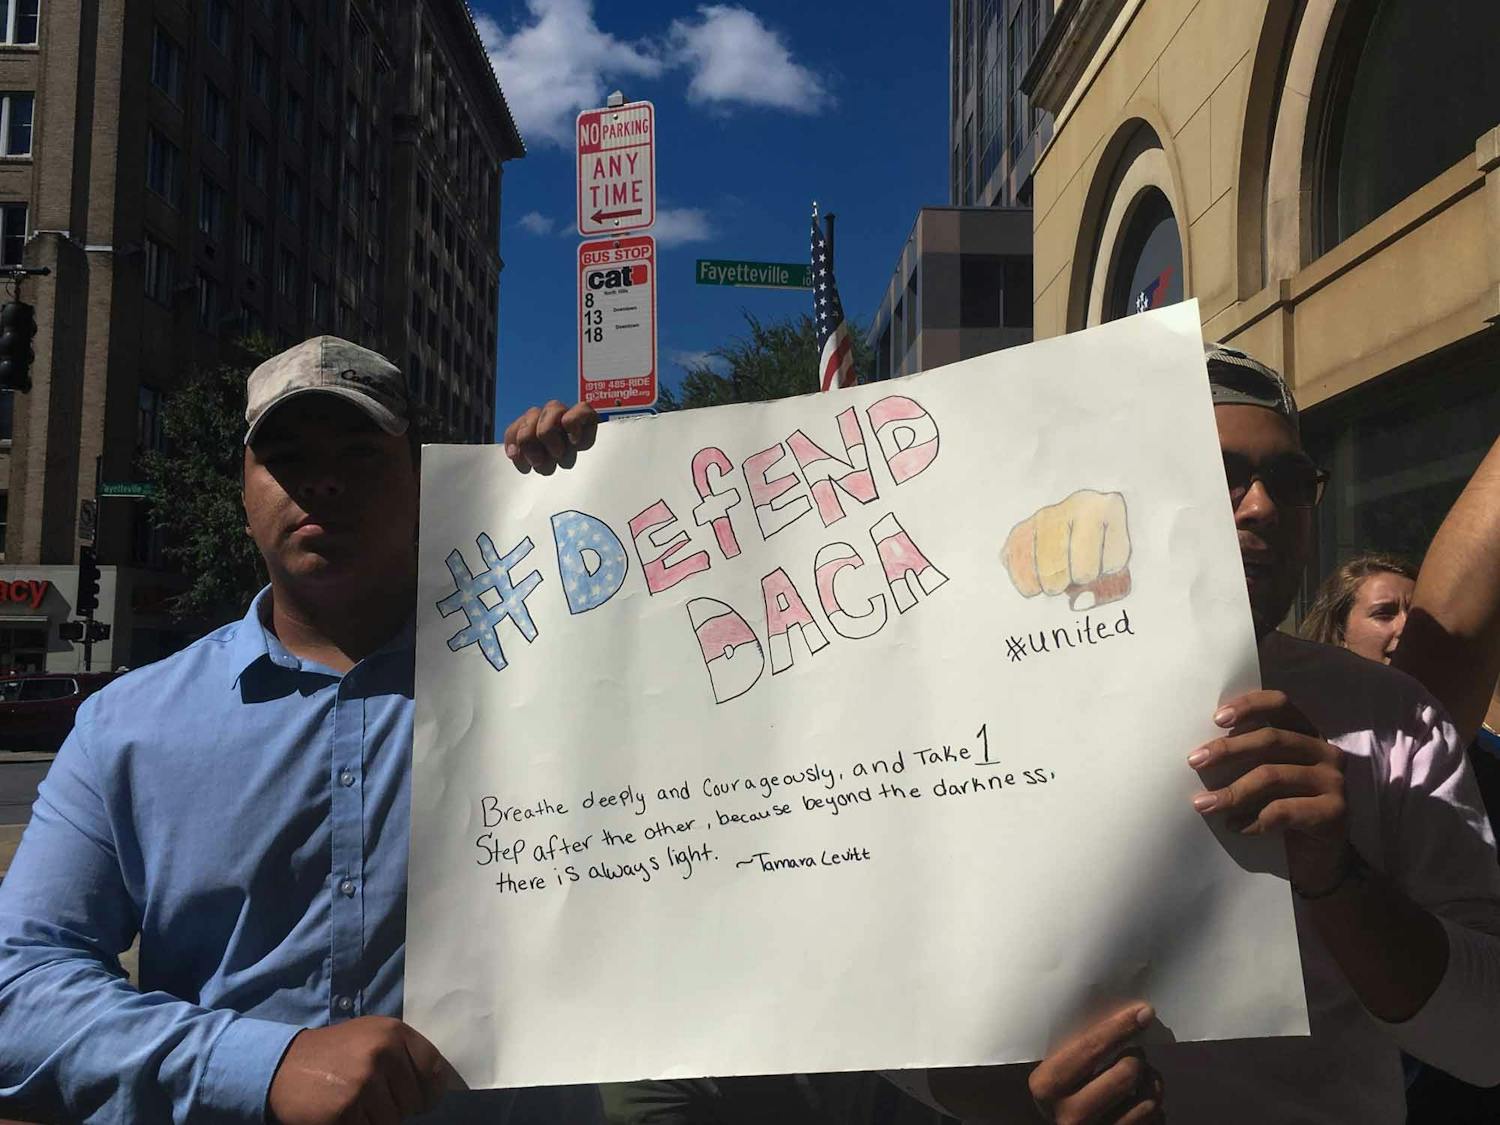 Protesters hold a sign during a demonstration in downtown Raleigh on Sunday, Oct. 1, 2017. About 250 people participated in the protest in support of DACA after President Donald Trump announced that he would phase out the program.